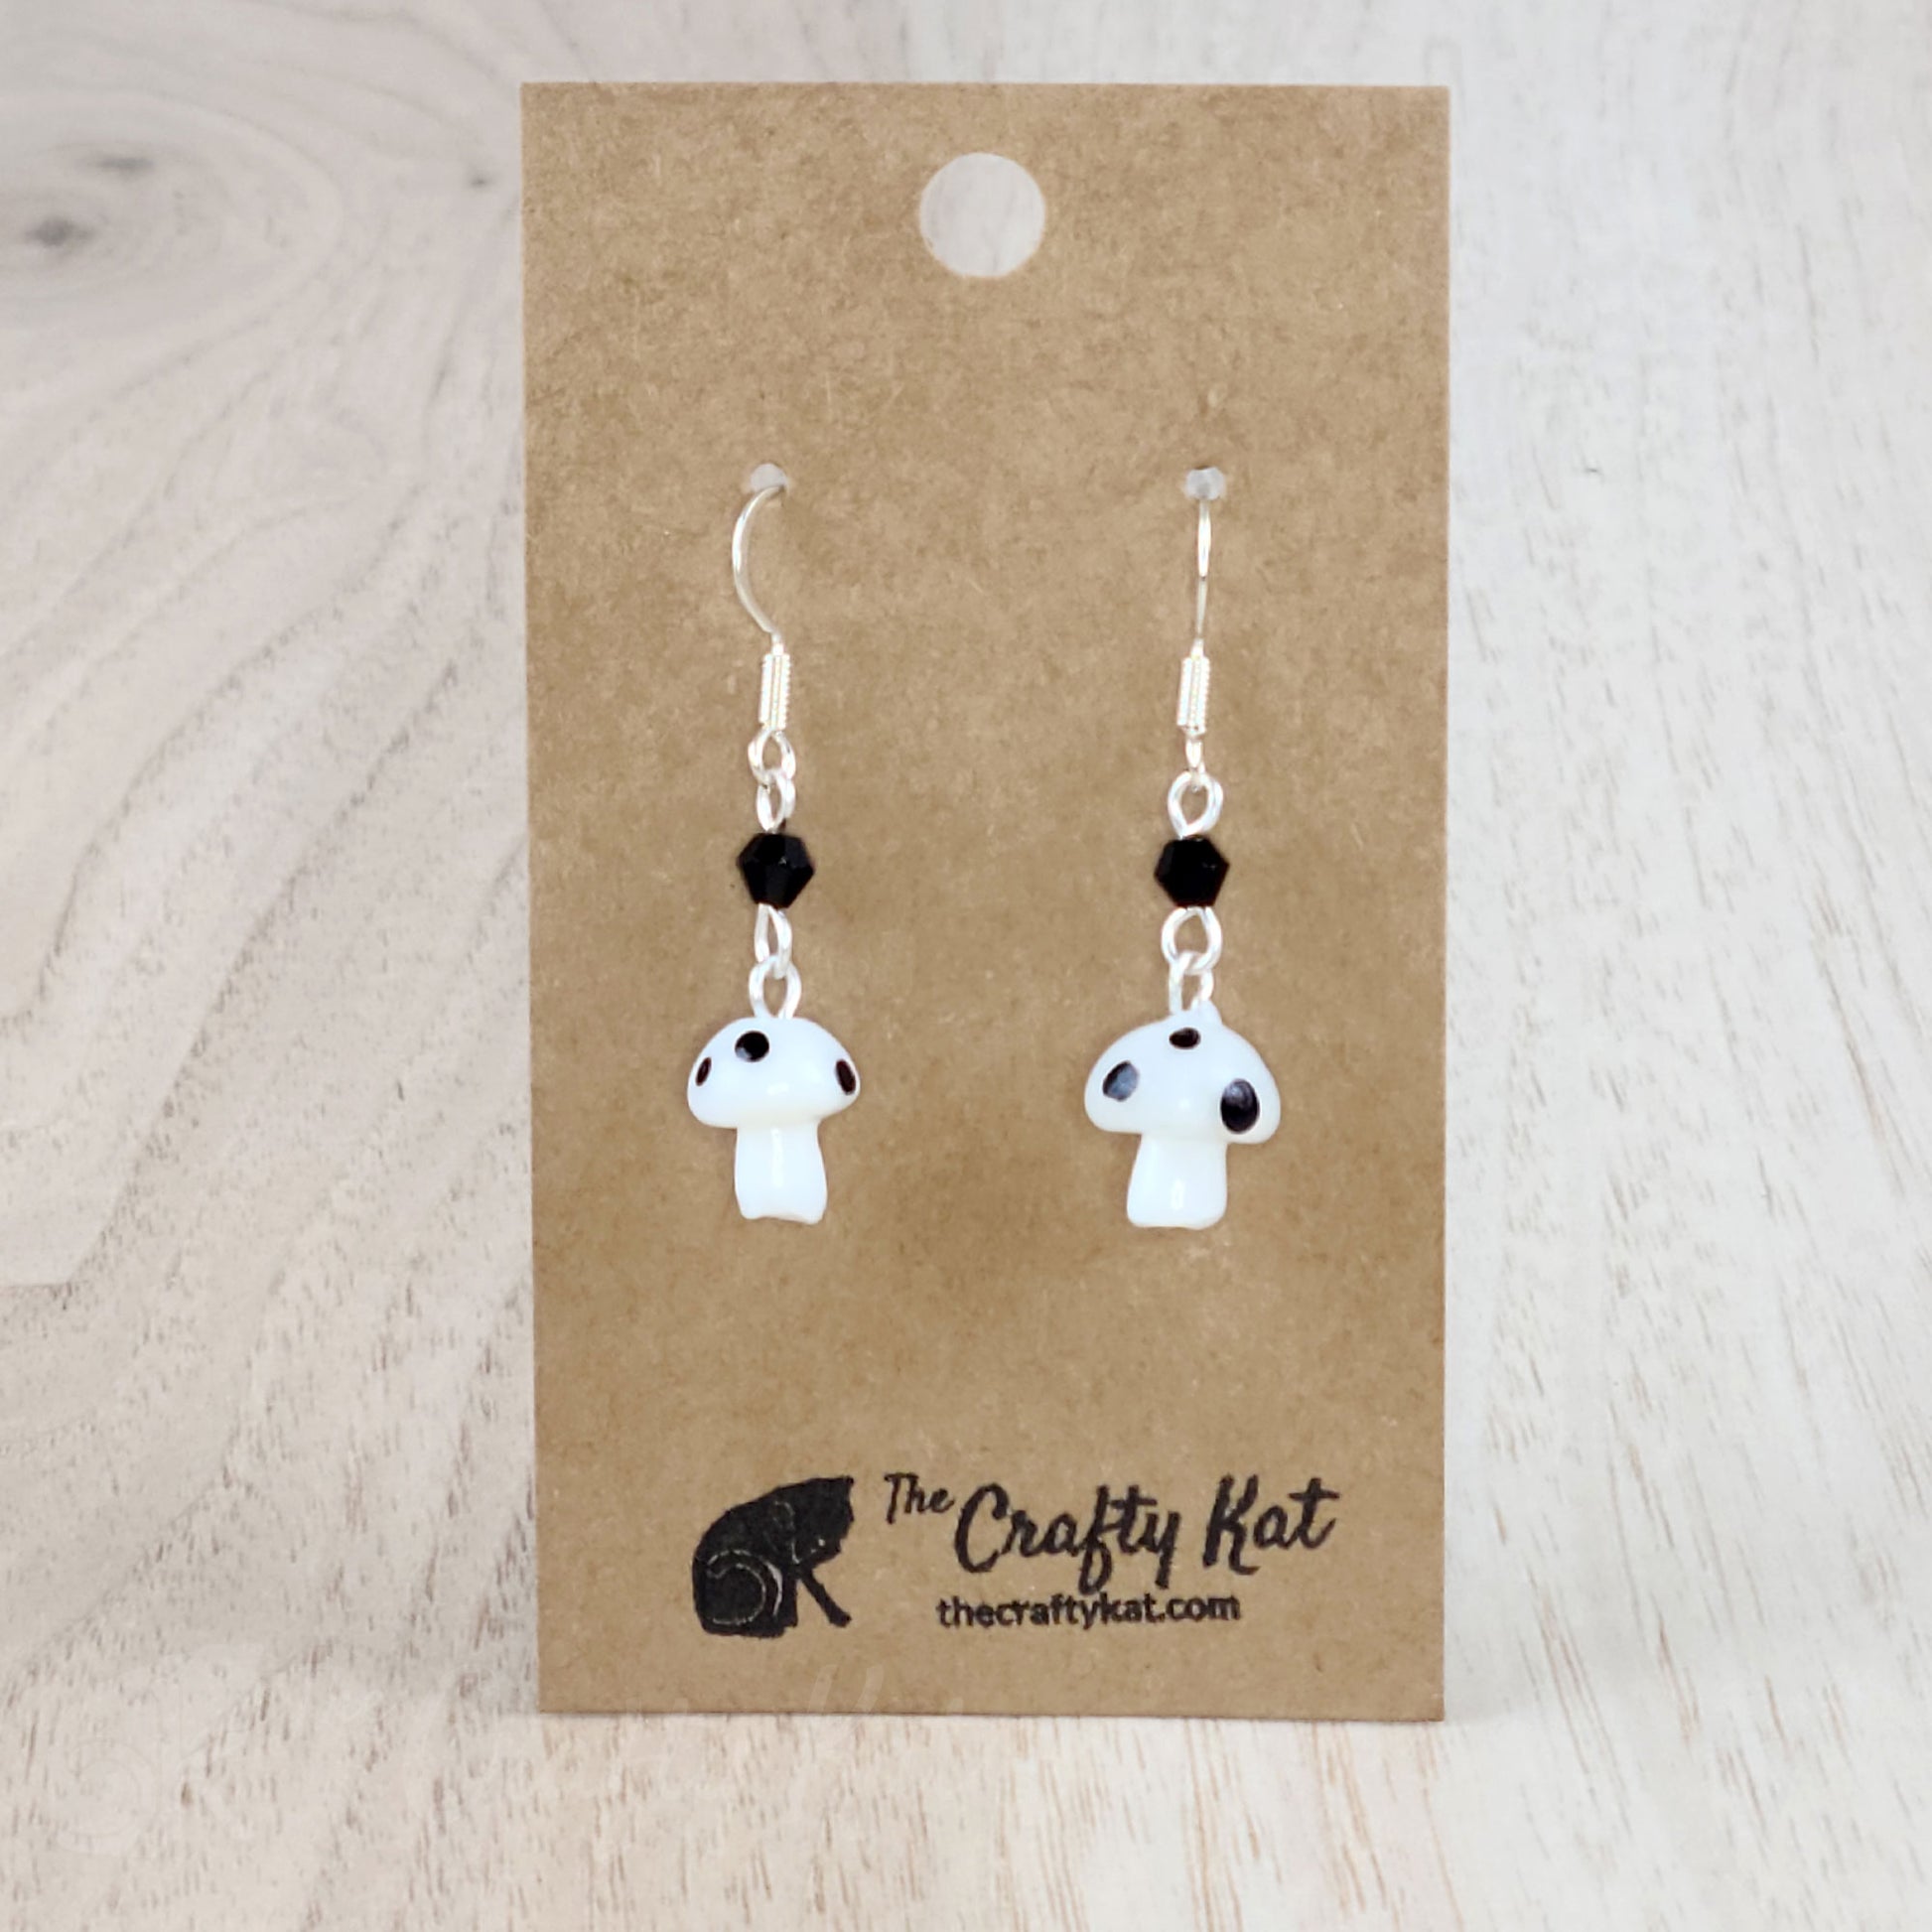 Mushroom-shaped tiered earrings made of lampwork and pressed glass beads with silver-plated base metal fittings. These mushrooms are white with black spots.